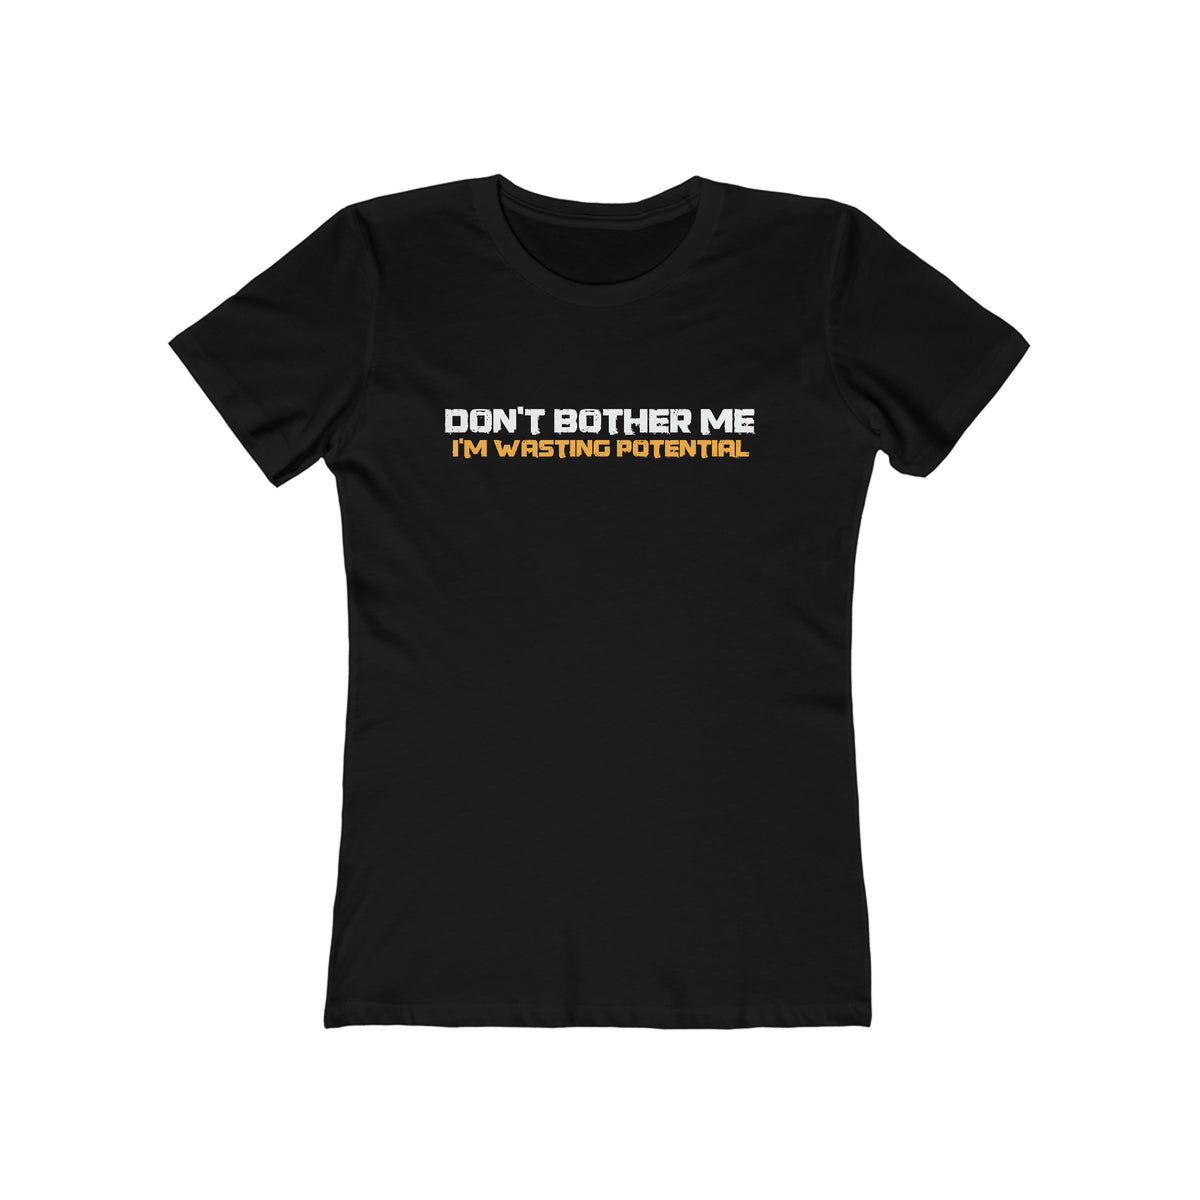 Don't Bother Me - I'm Wasting Potential  - Women’s T-Shirt